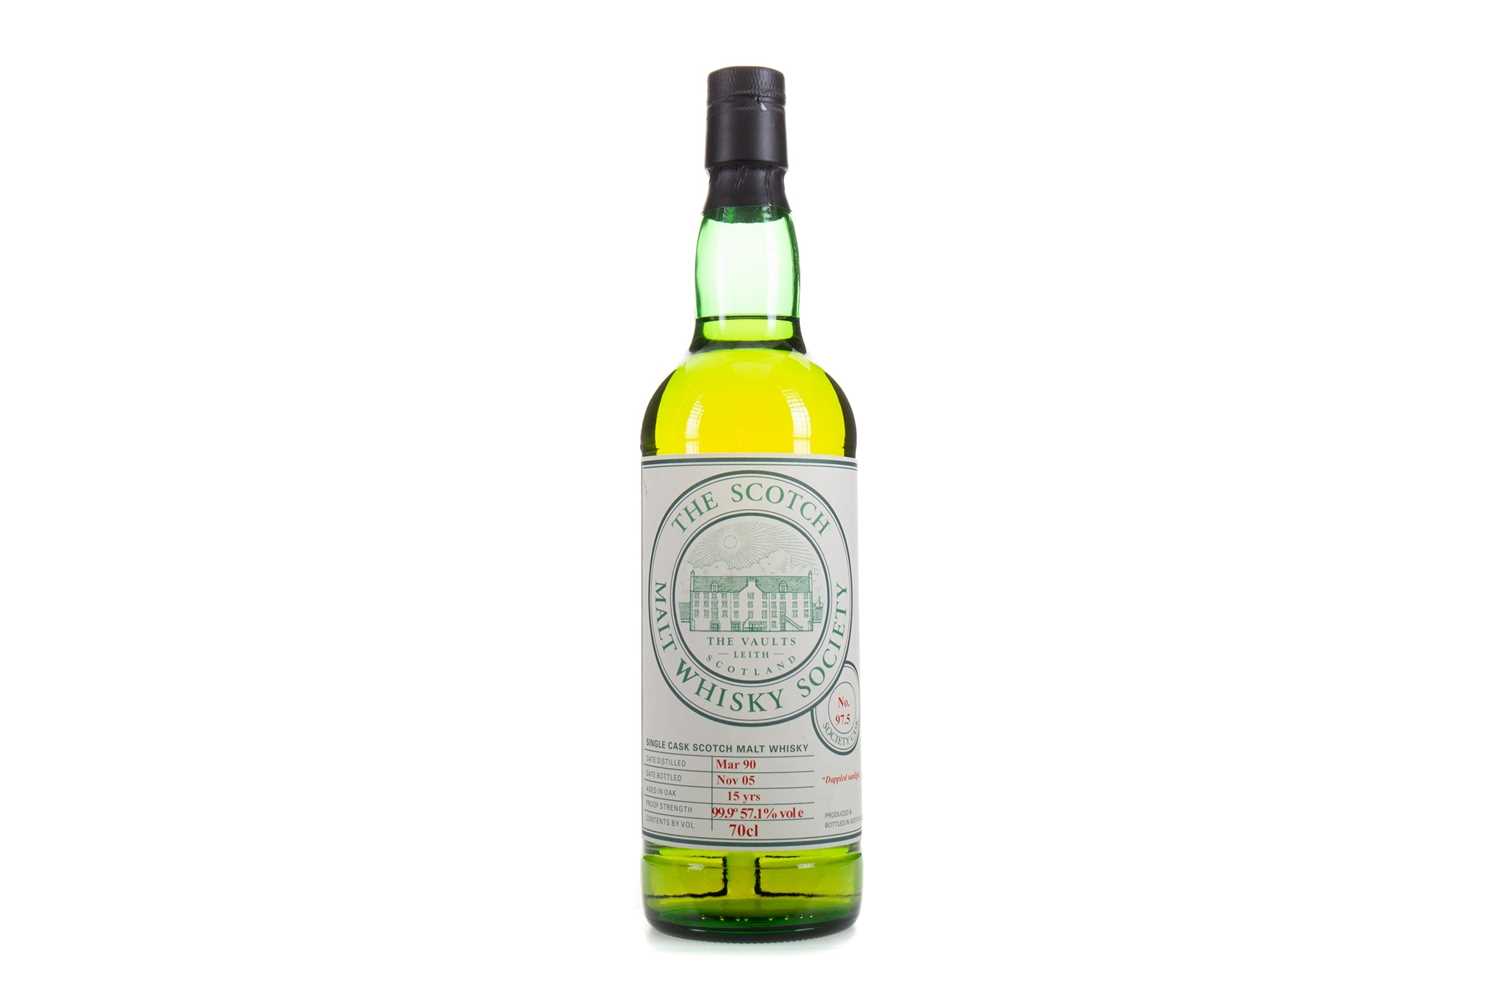 Lot 44 - SMWS 97.5 LITTLEMILL 1990 15 YEAR OLD